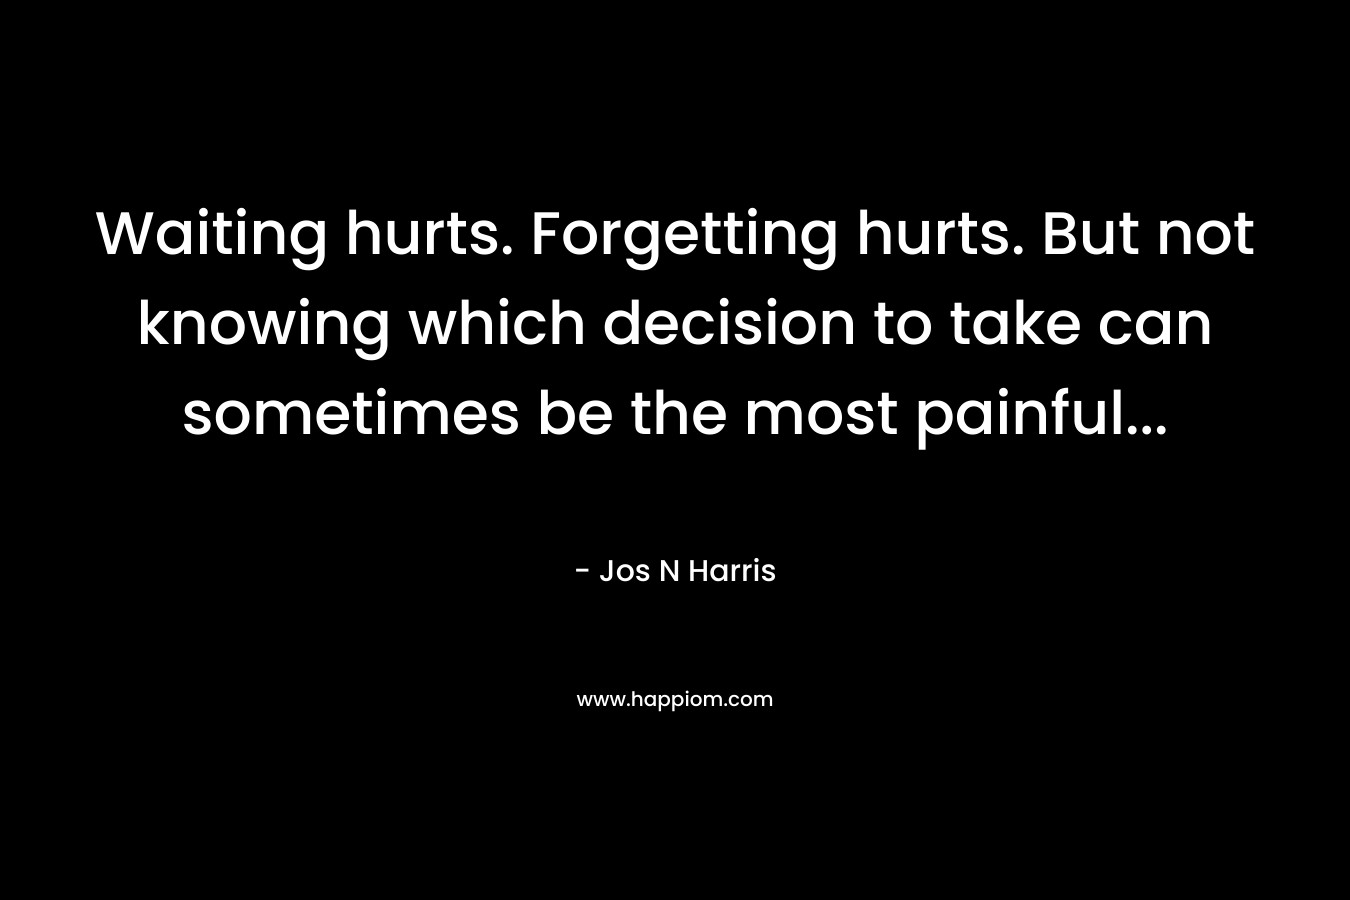 Waiting hurts. Forgetting hurts. But not knowing which decision to take can sometimes be the most painful… – Jos N Harris